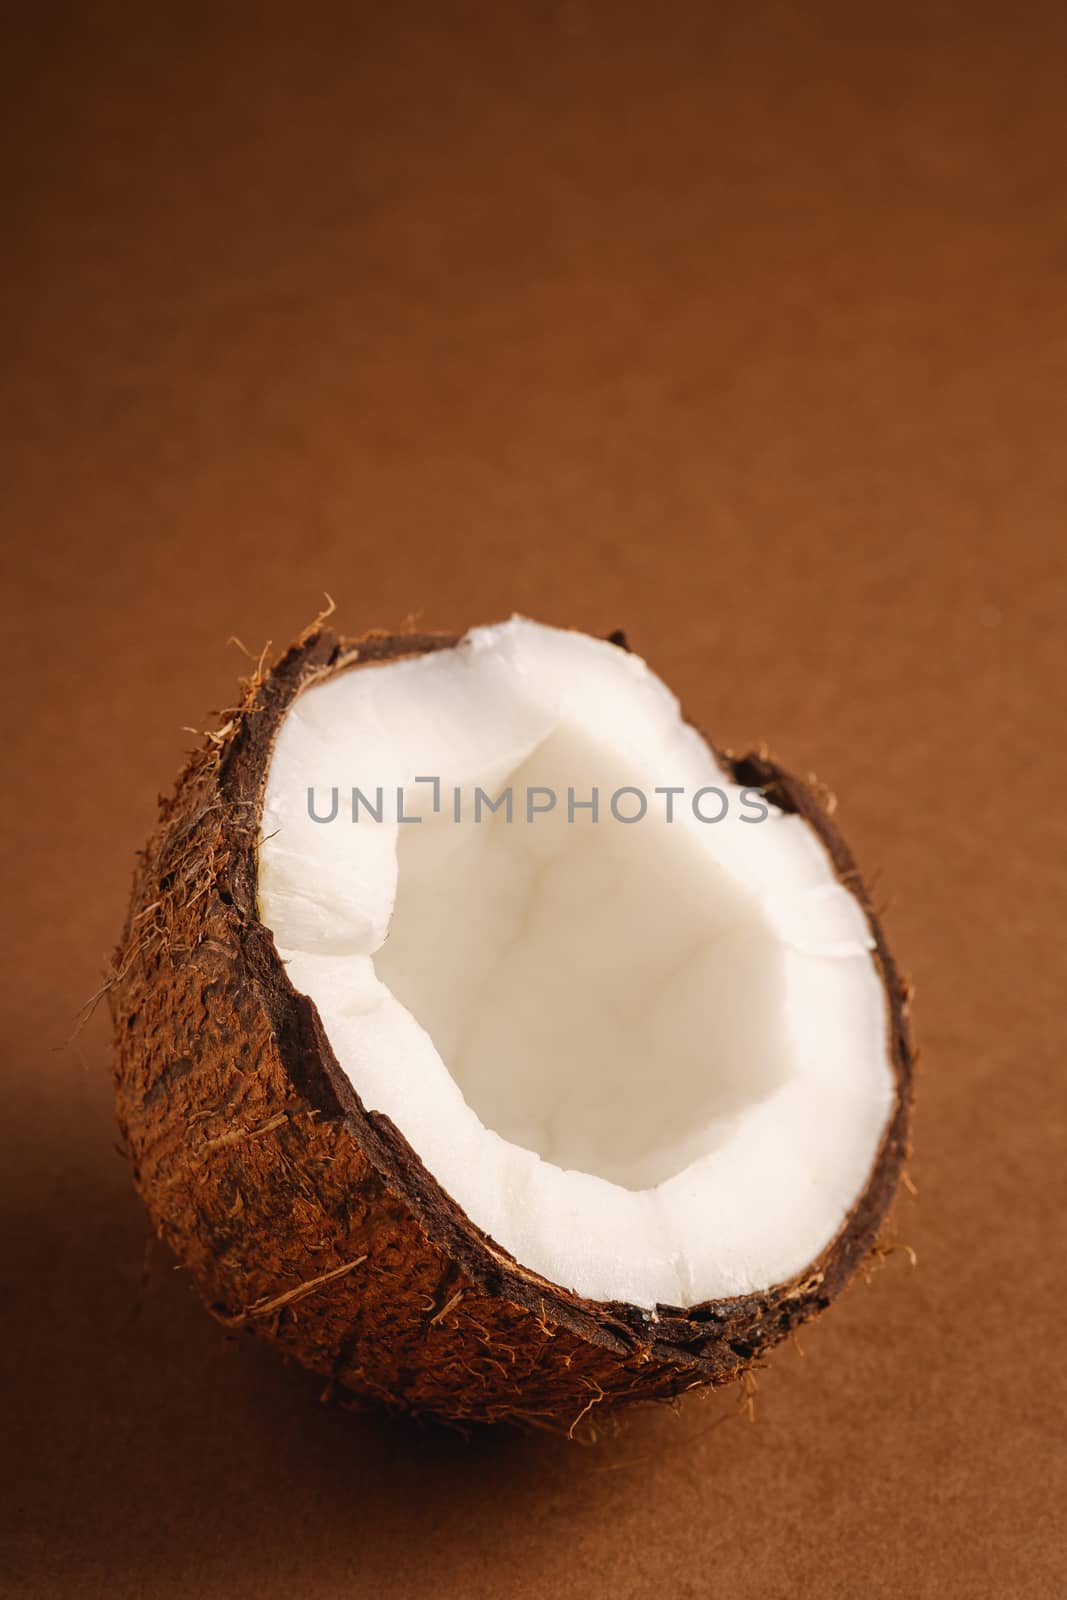 Single coconut fruit on brown plain background by Frostroomhead